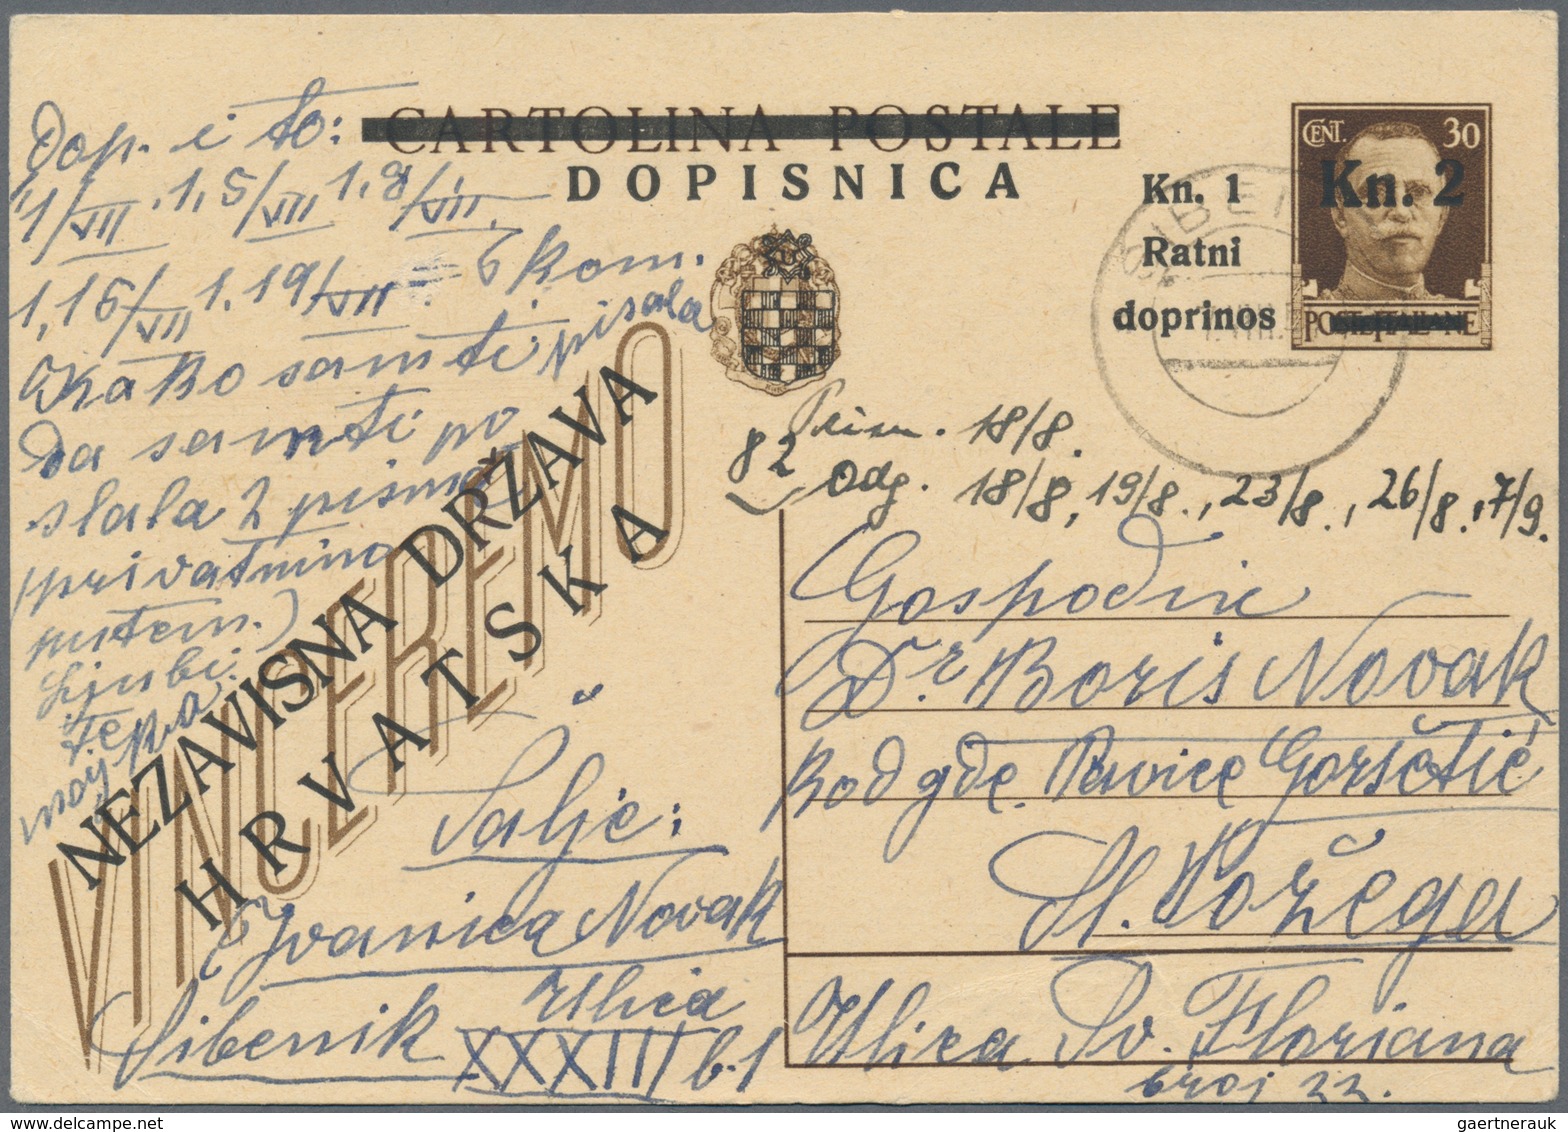 Kroatien - Ganzsachen: 1944, Card Kn.2+Kn.1 On 30c. Brown Commercially Used With Comprehensive Messa - Croatia